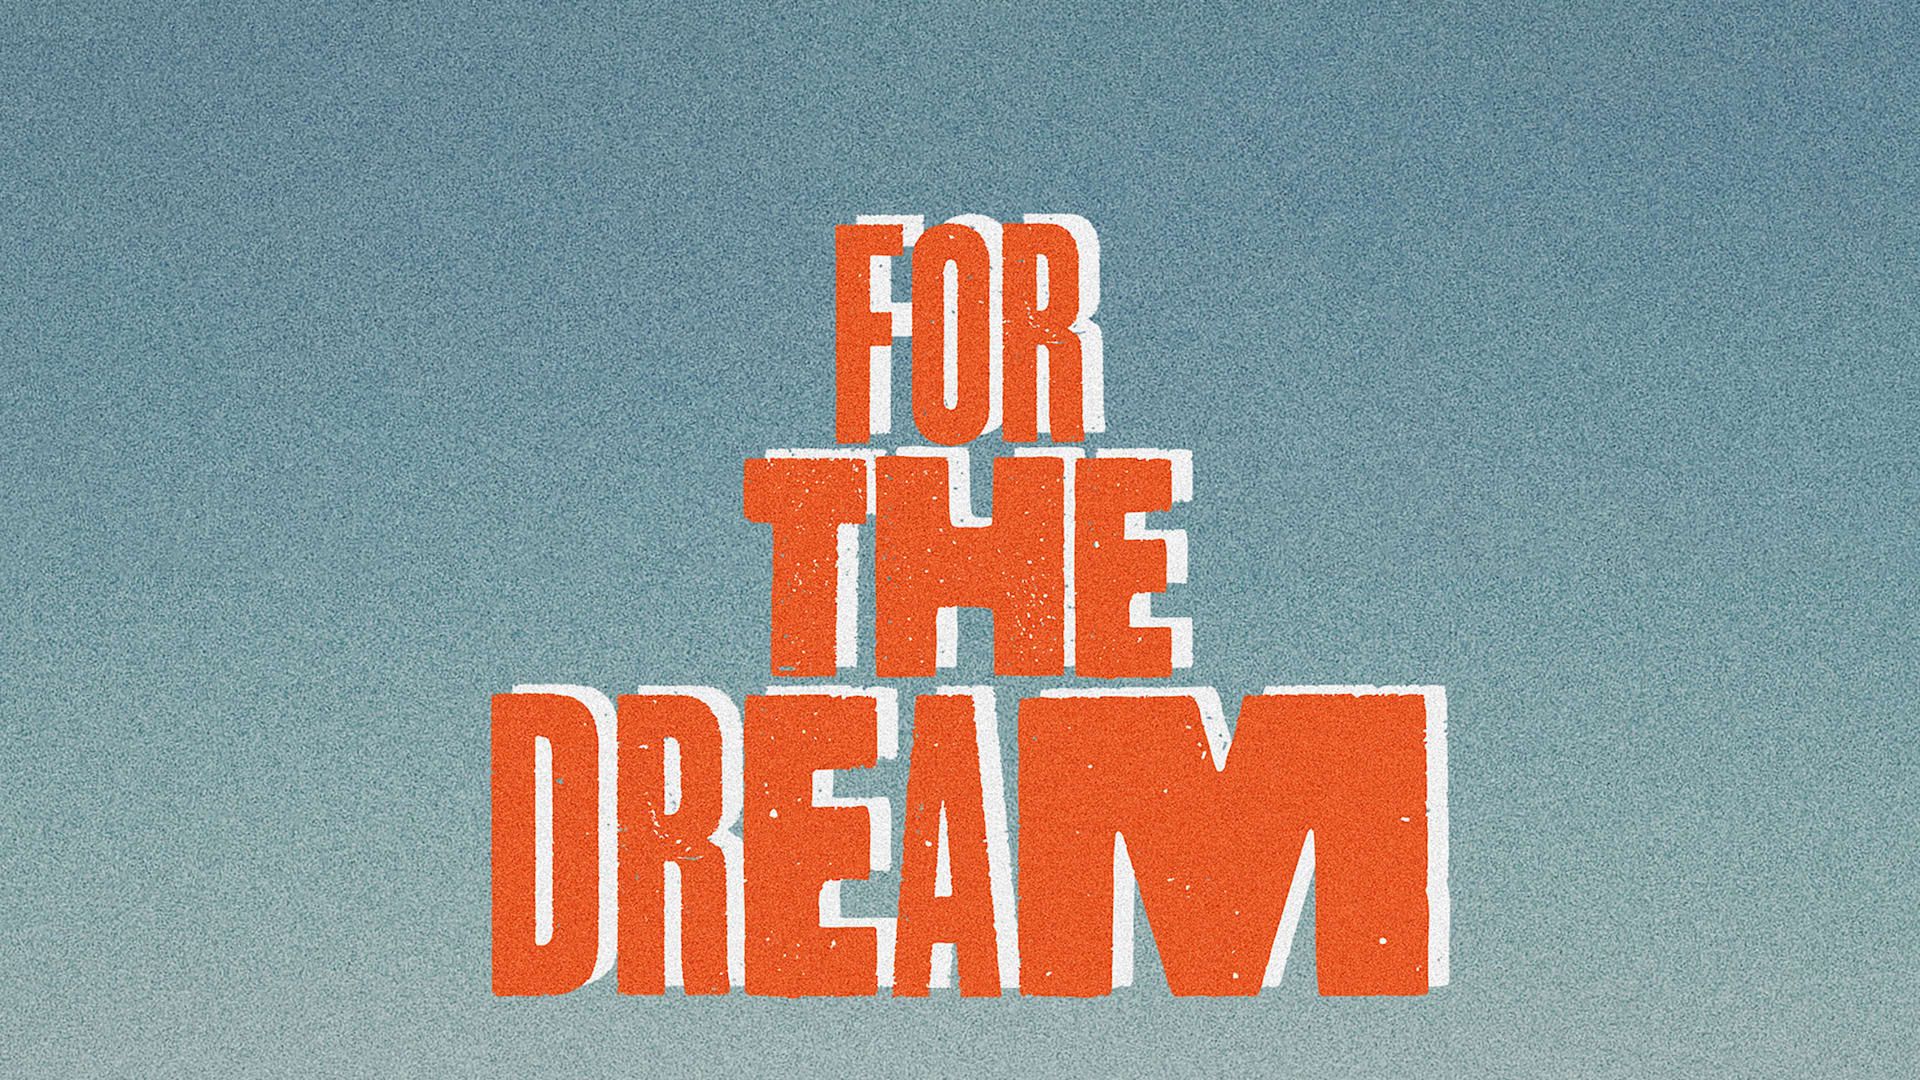 For the Dream